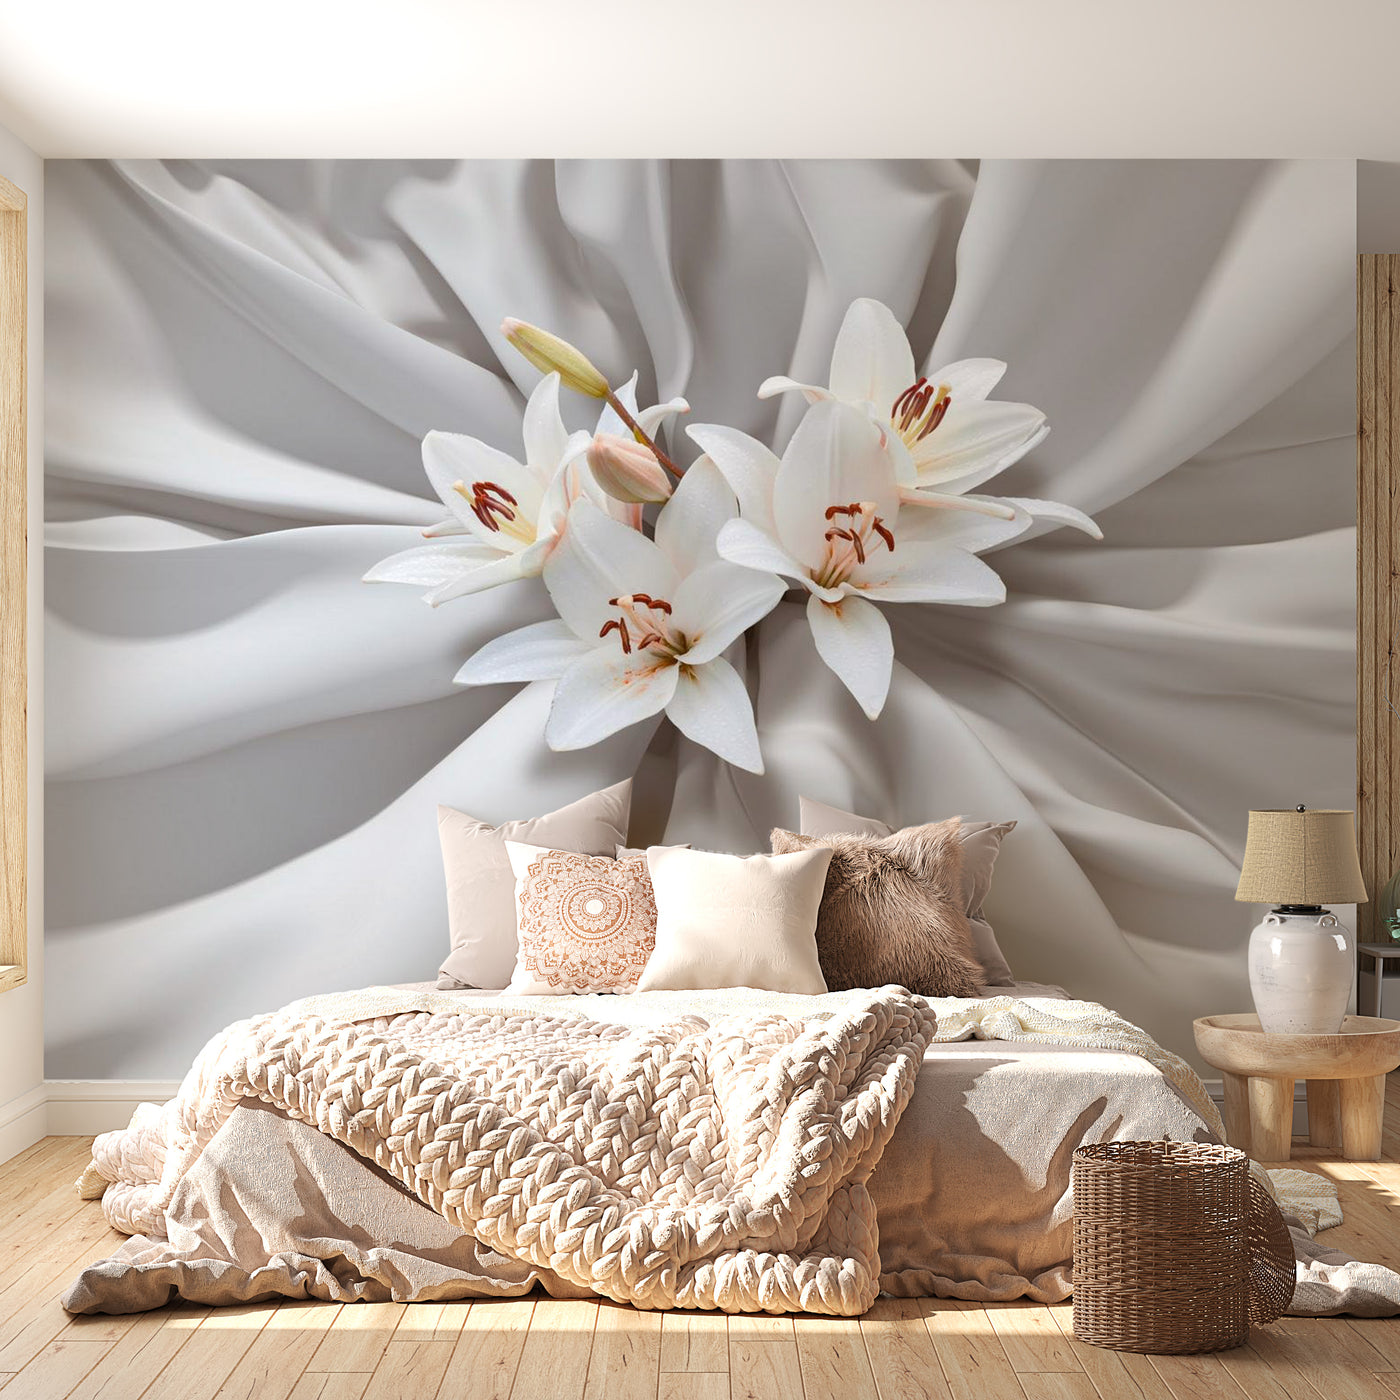 Peel & Stick Floral Wall Mural - Sensual Lilies - Removable Wall Decals